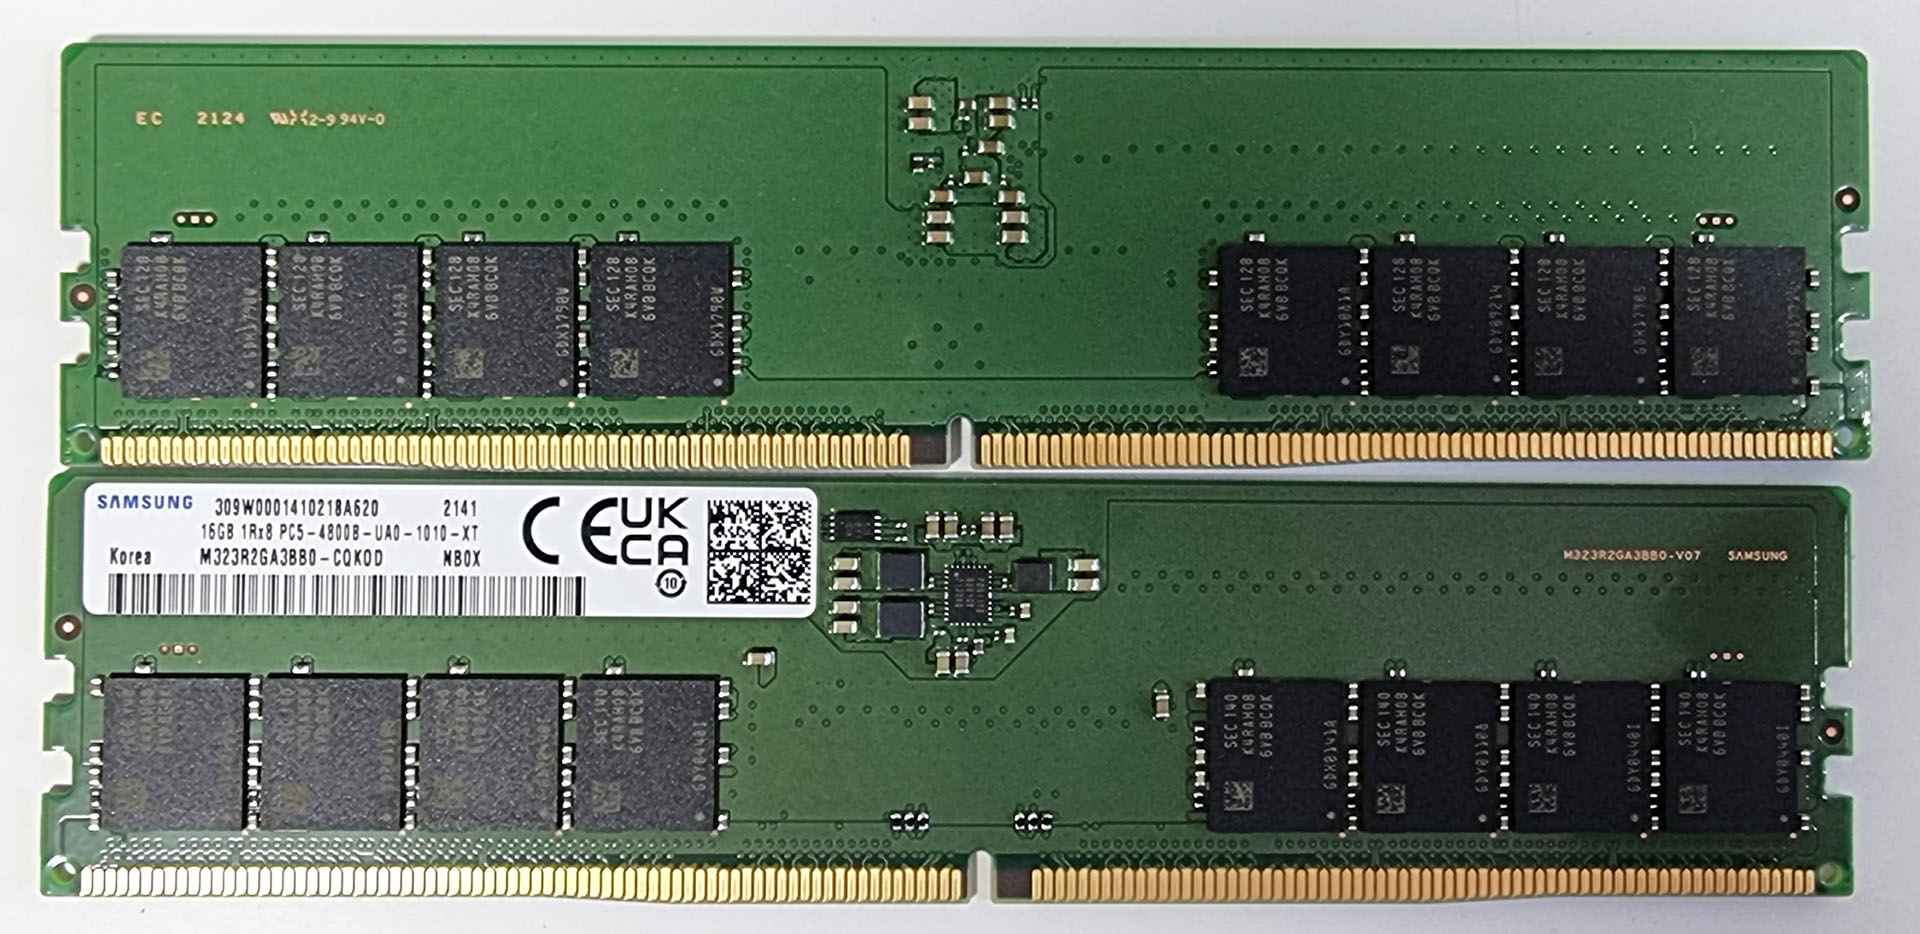 DDR5 Demystified - Feat. Samsung DDR5-4800: A Look at Ranks, DPCs, and Do